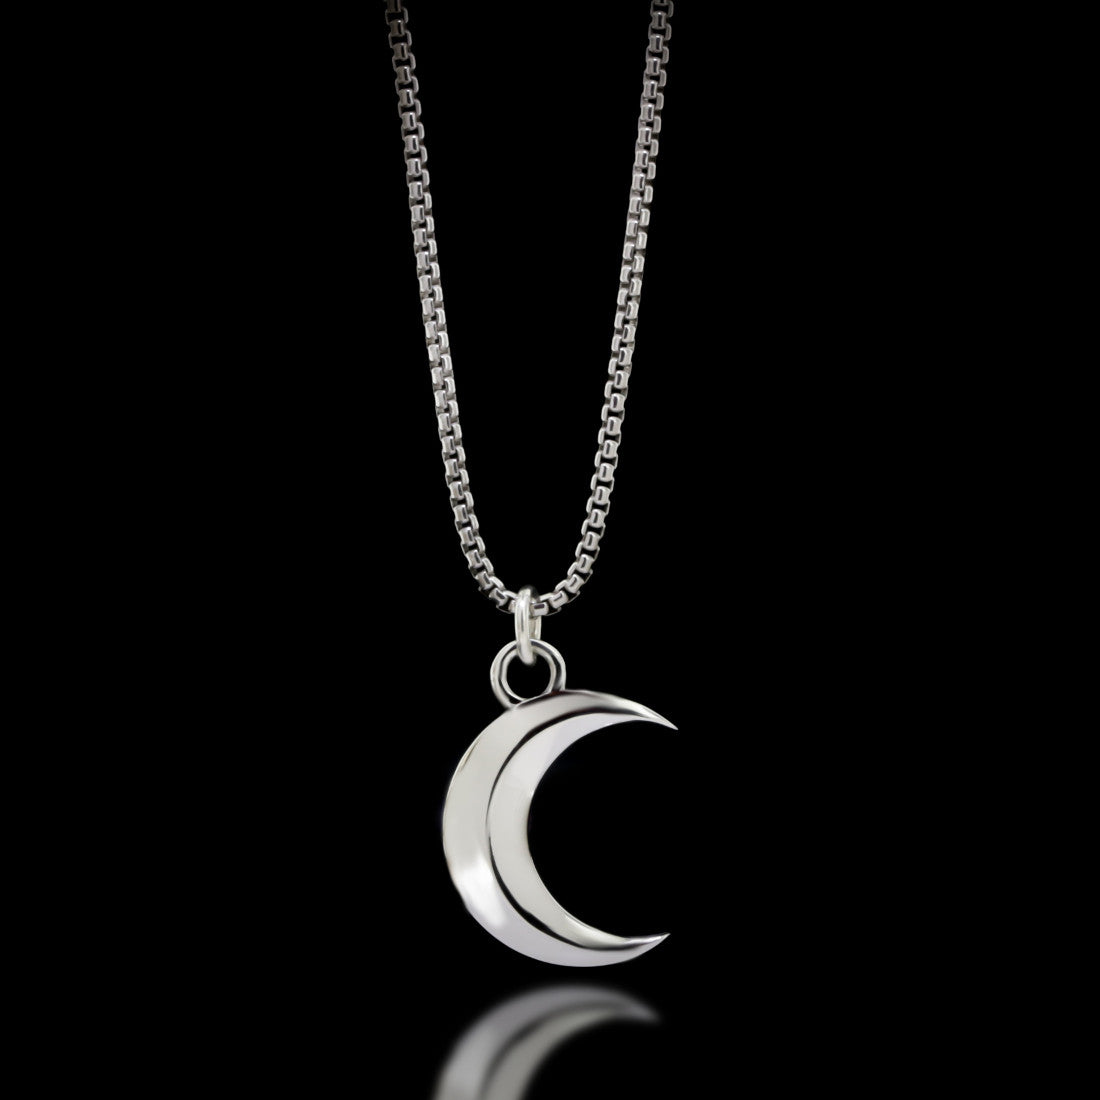 Luna Necklace - Sterling Silver - Twisted Love NYC